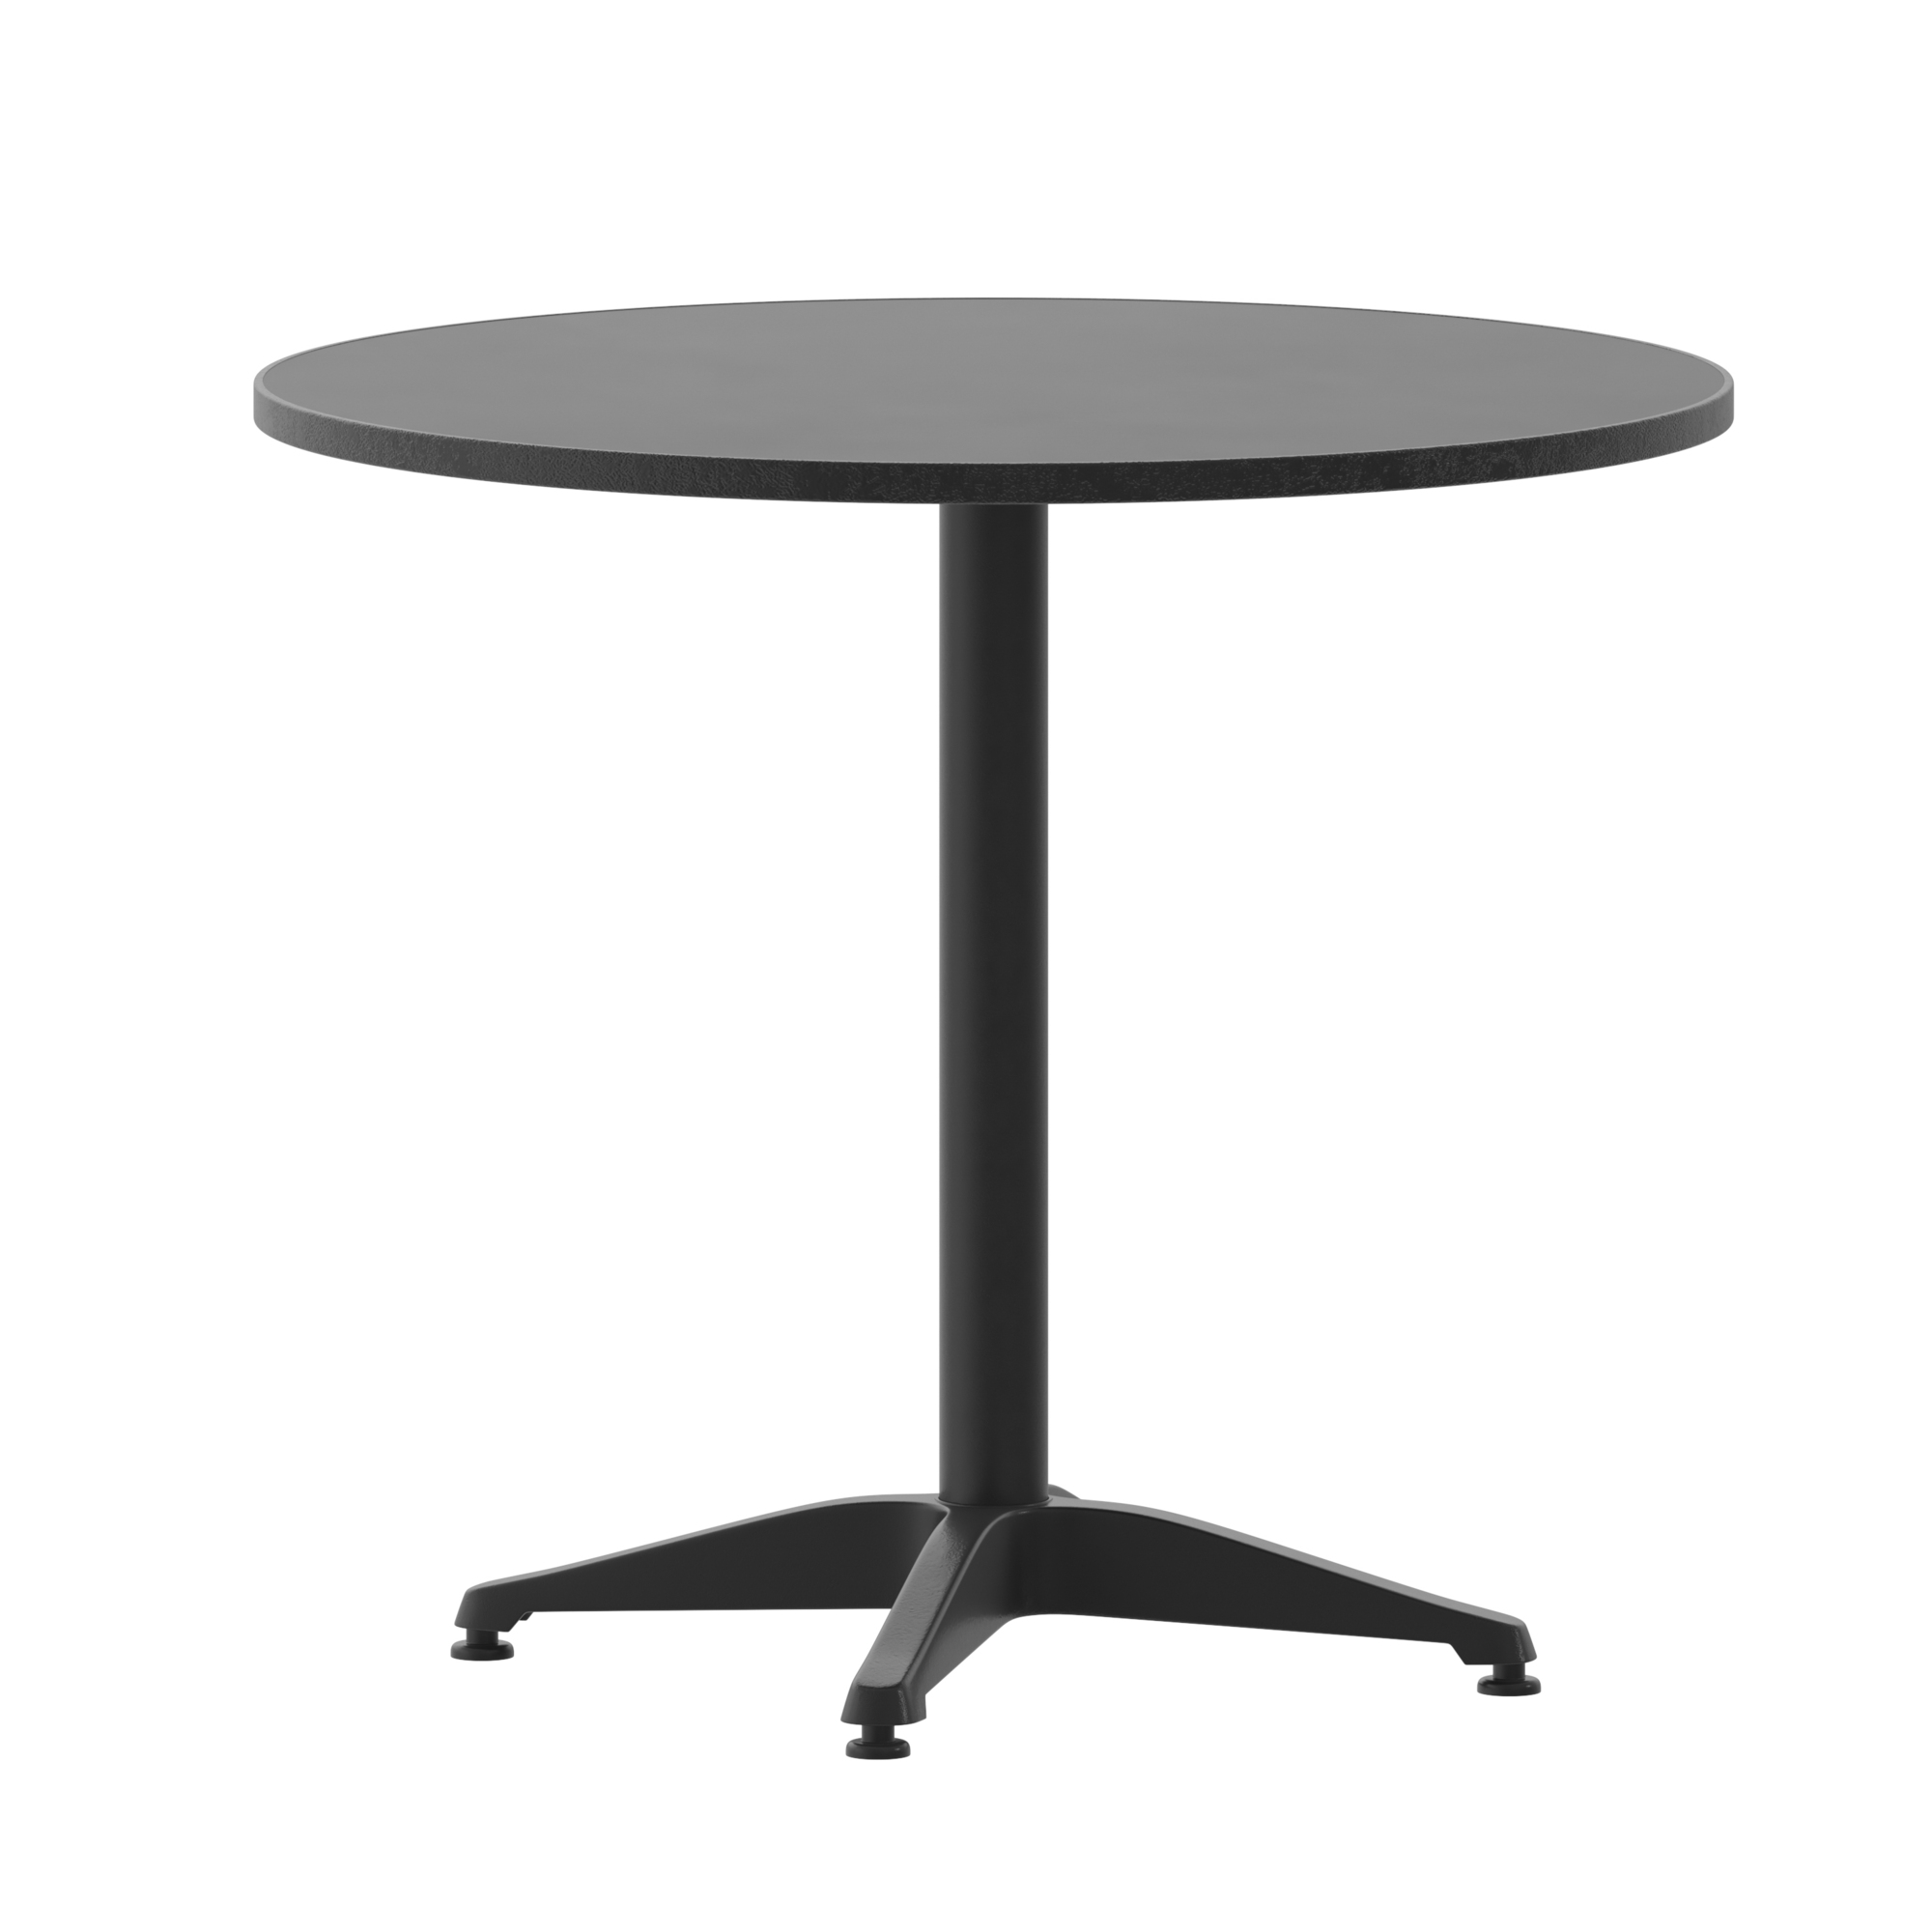 Flash Furniture, 31.5RD Black Metal Indoor-Outdoor Table w/ Base, Table Shape Round, Primary Color Black, Height 27.5 in, Model TLH0523BK